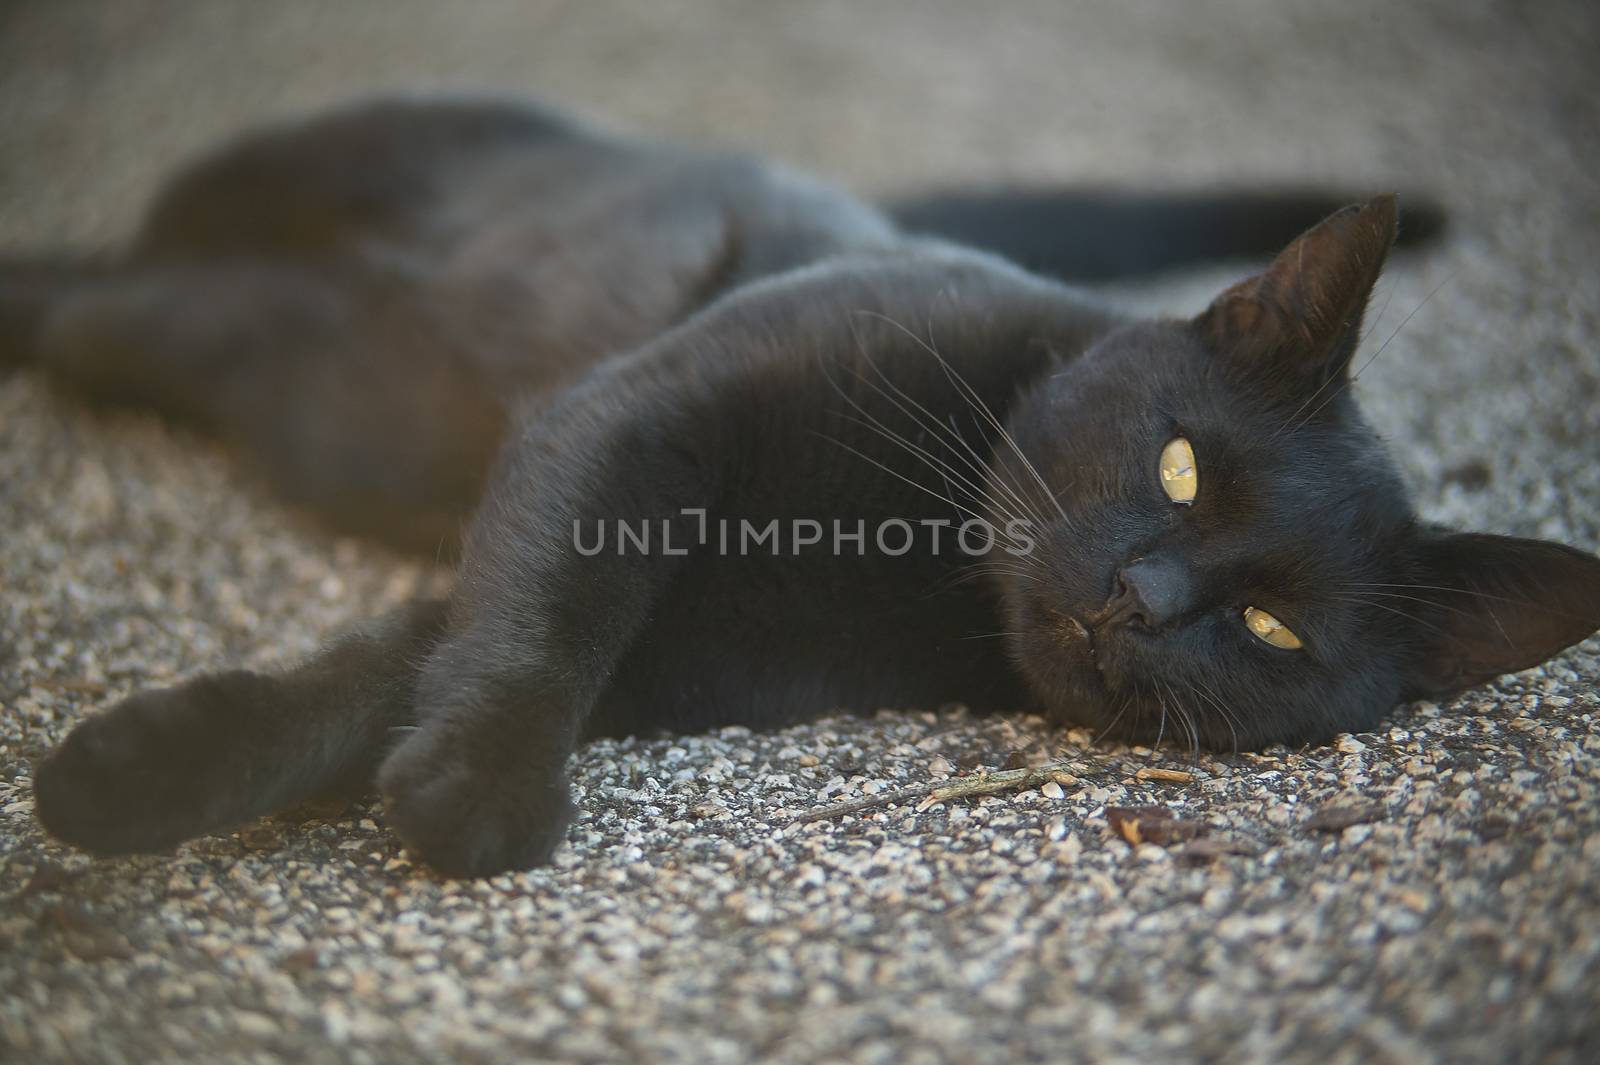 The muzzle of a black cat by pippocarlot